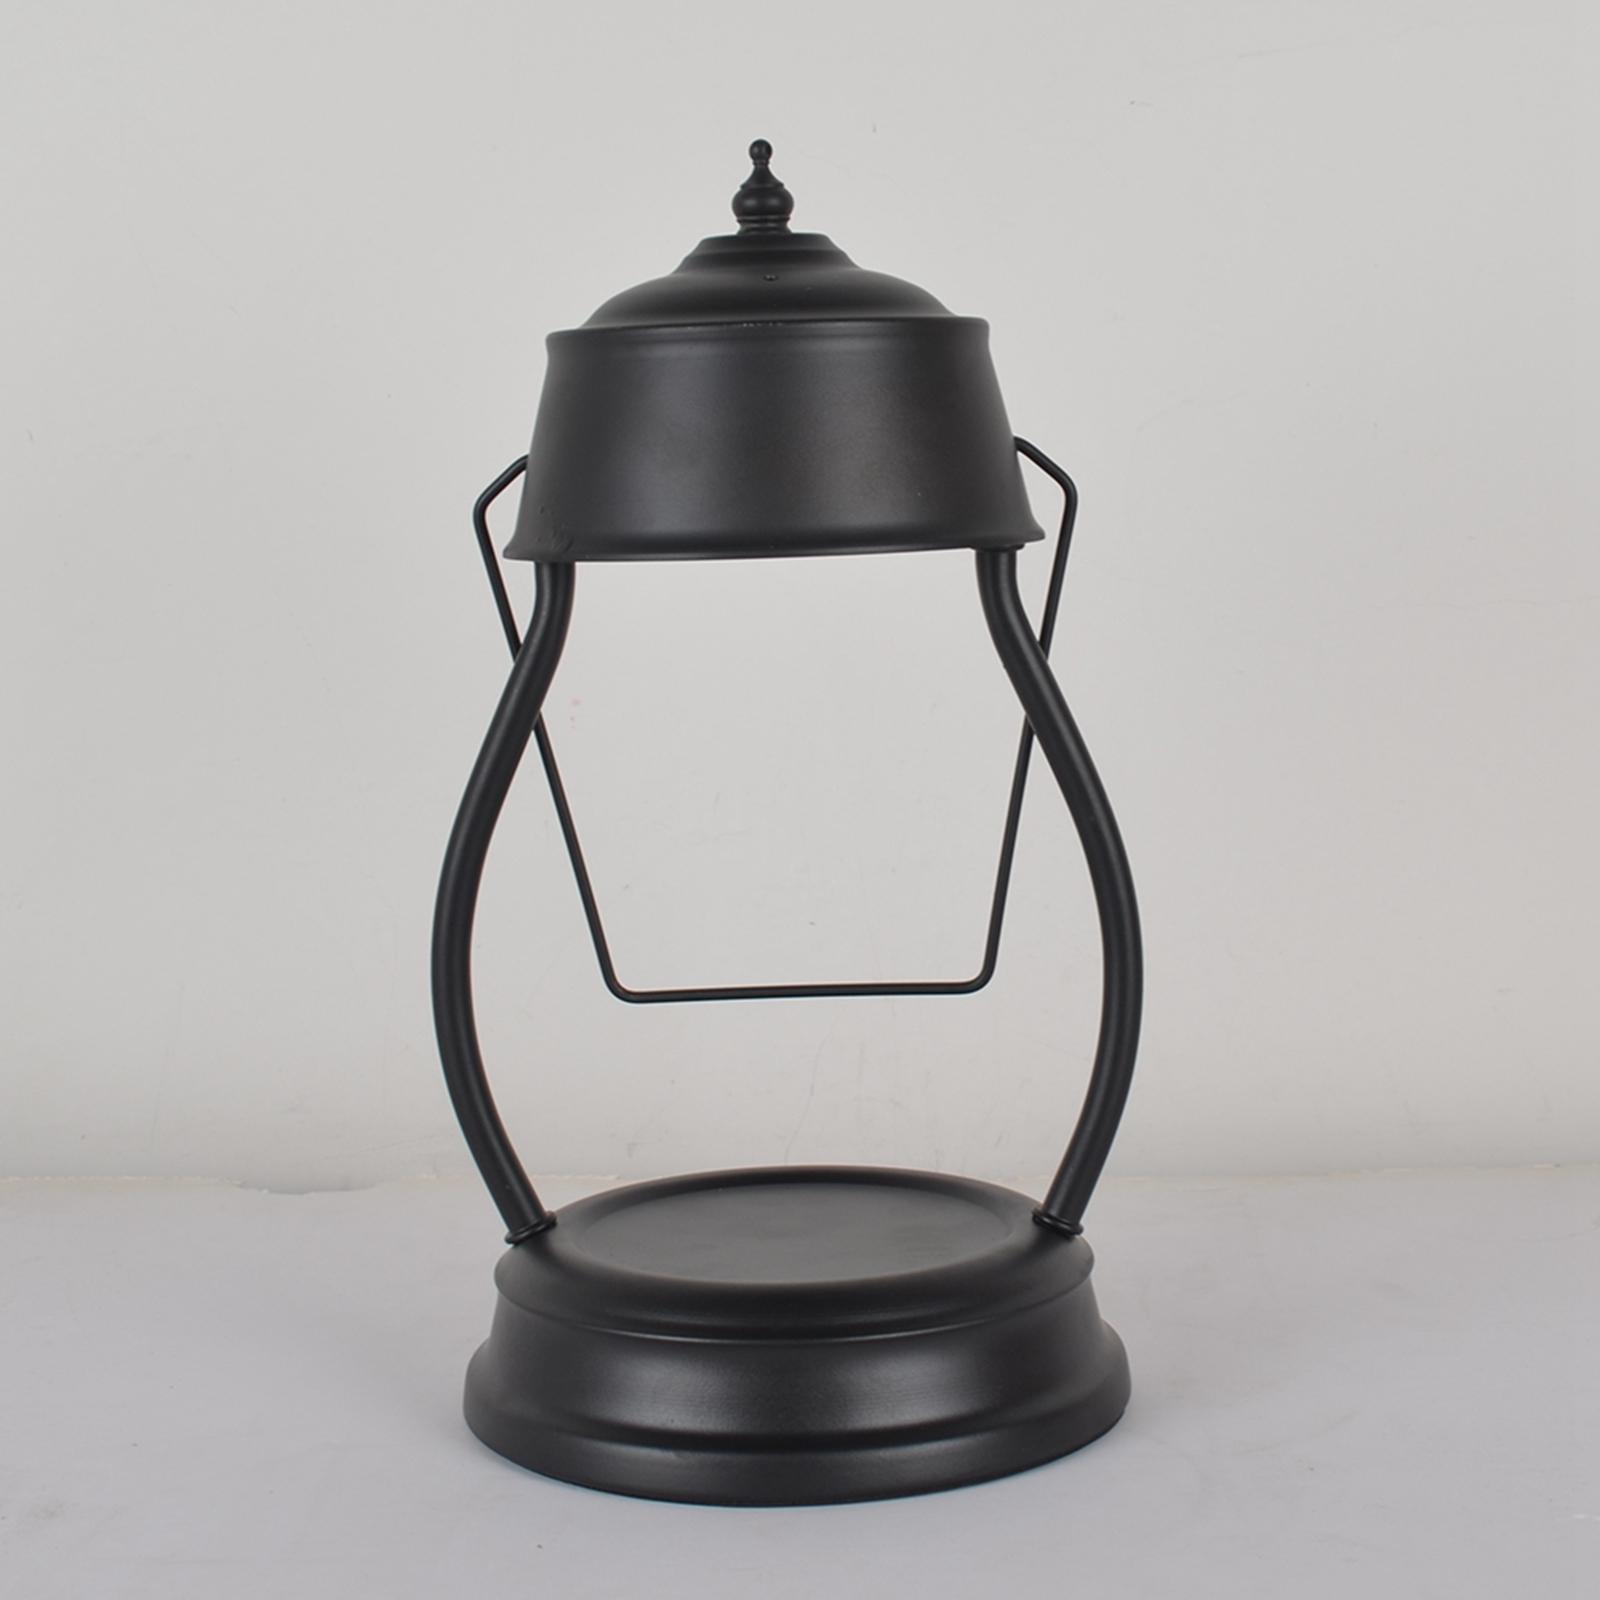 Candle Warmer Lamp  For   Melts Home Decor